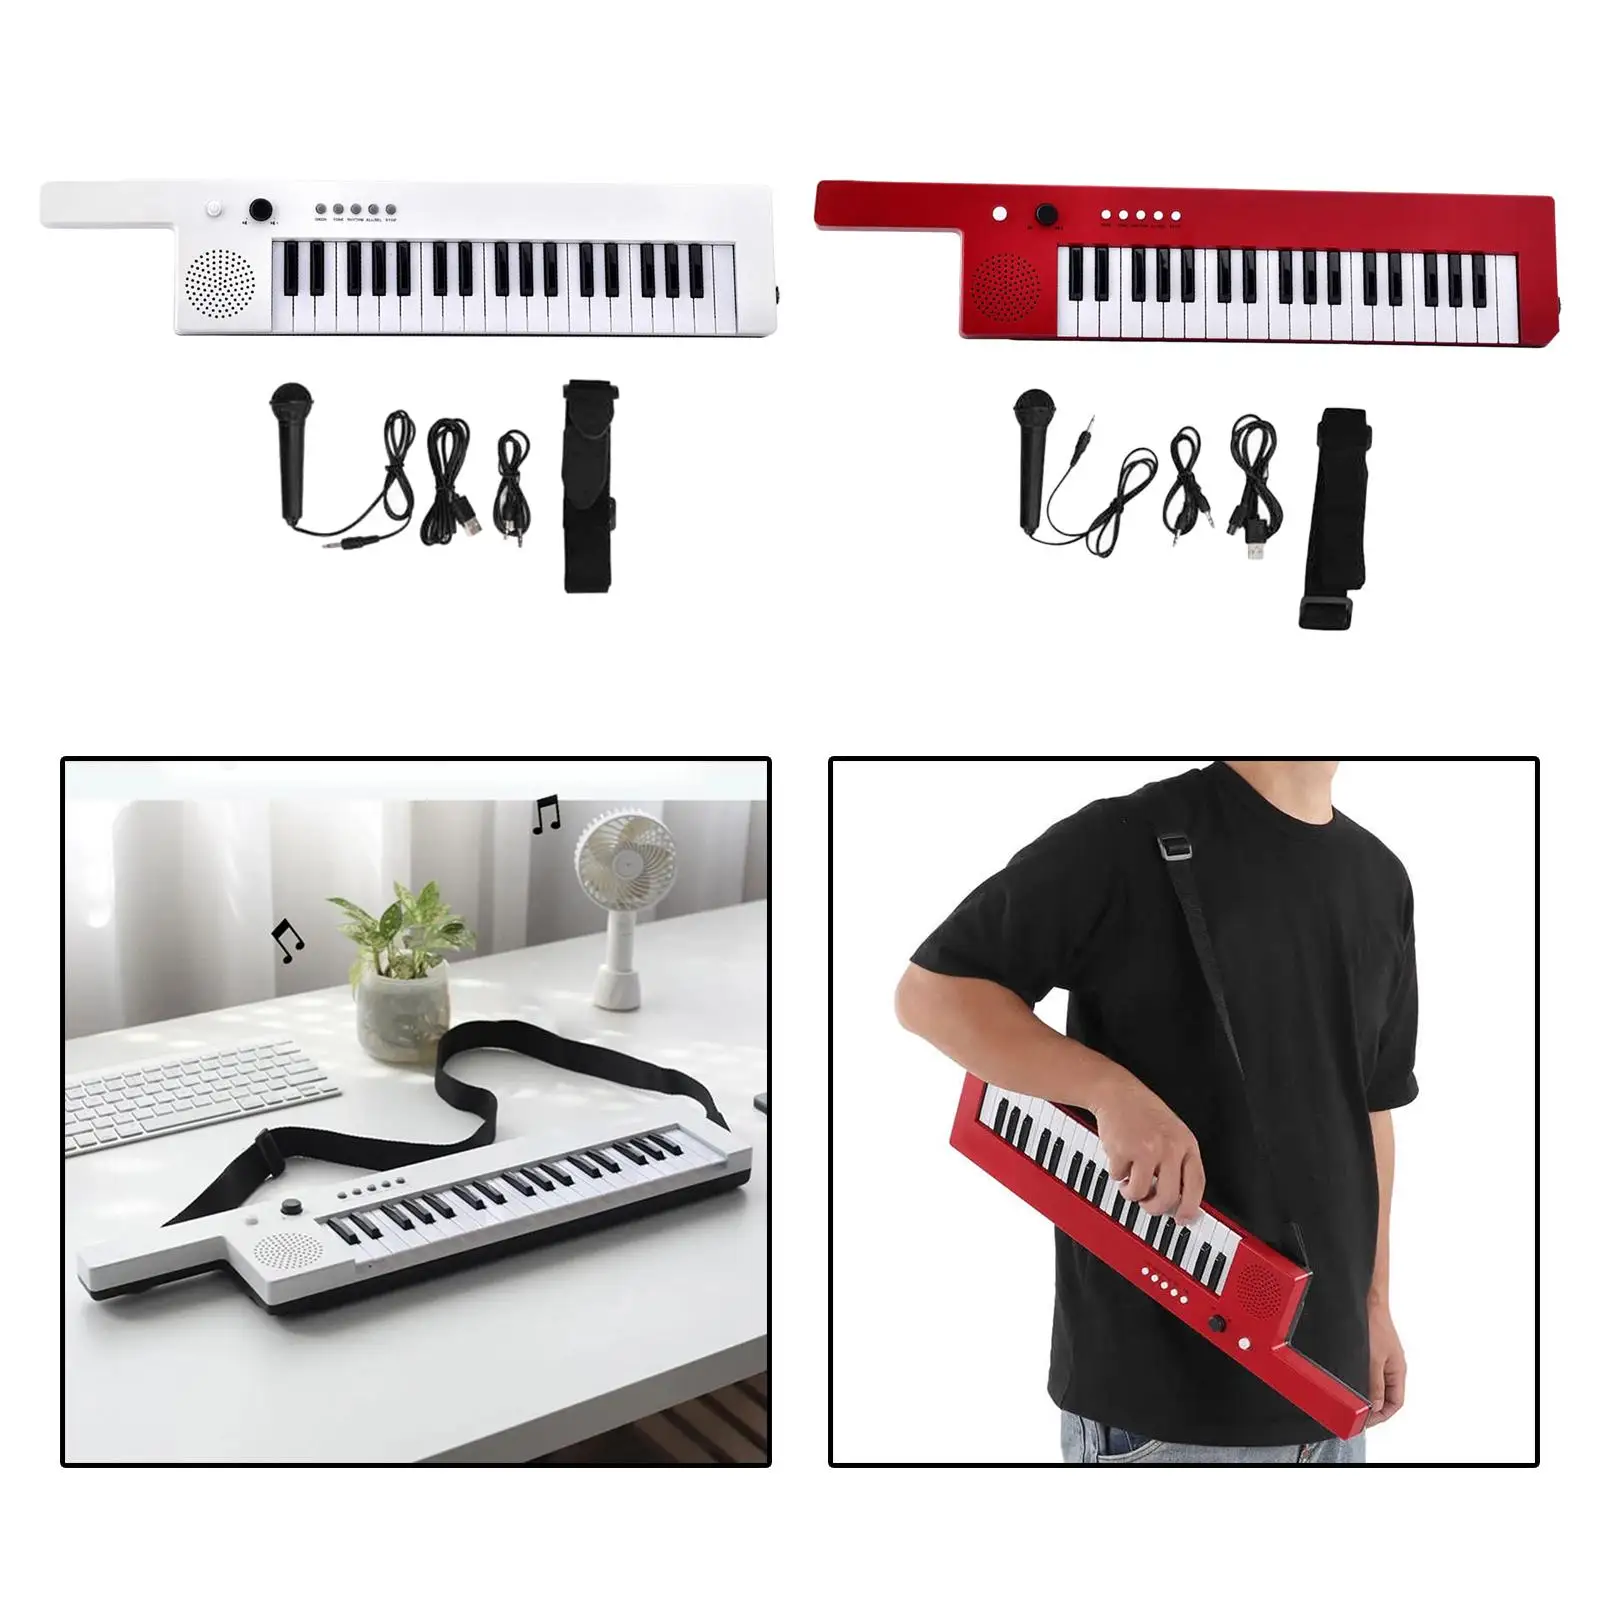 Keyboard Piano Instrument Toy Practical 37 Keys for Learning Party Stage